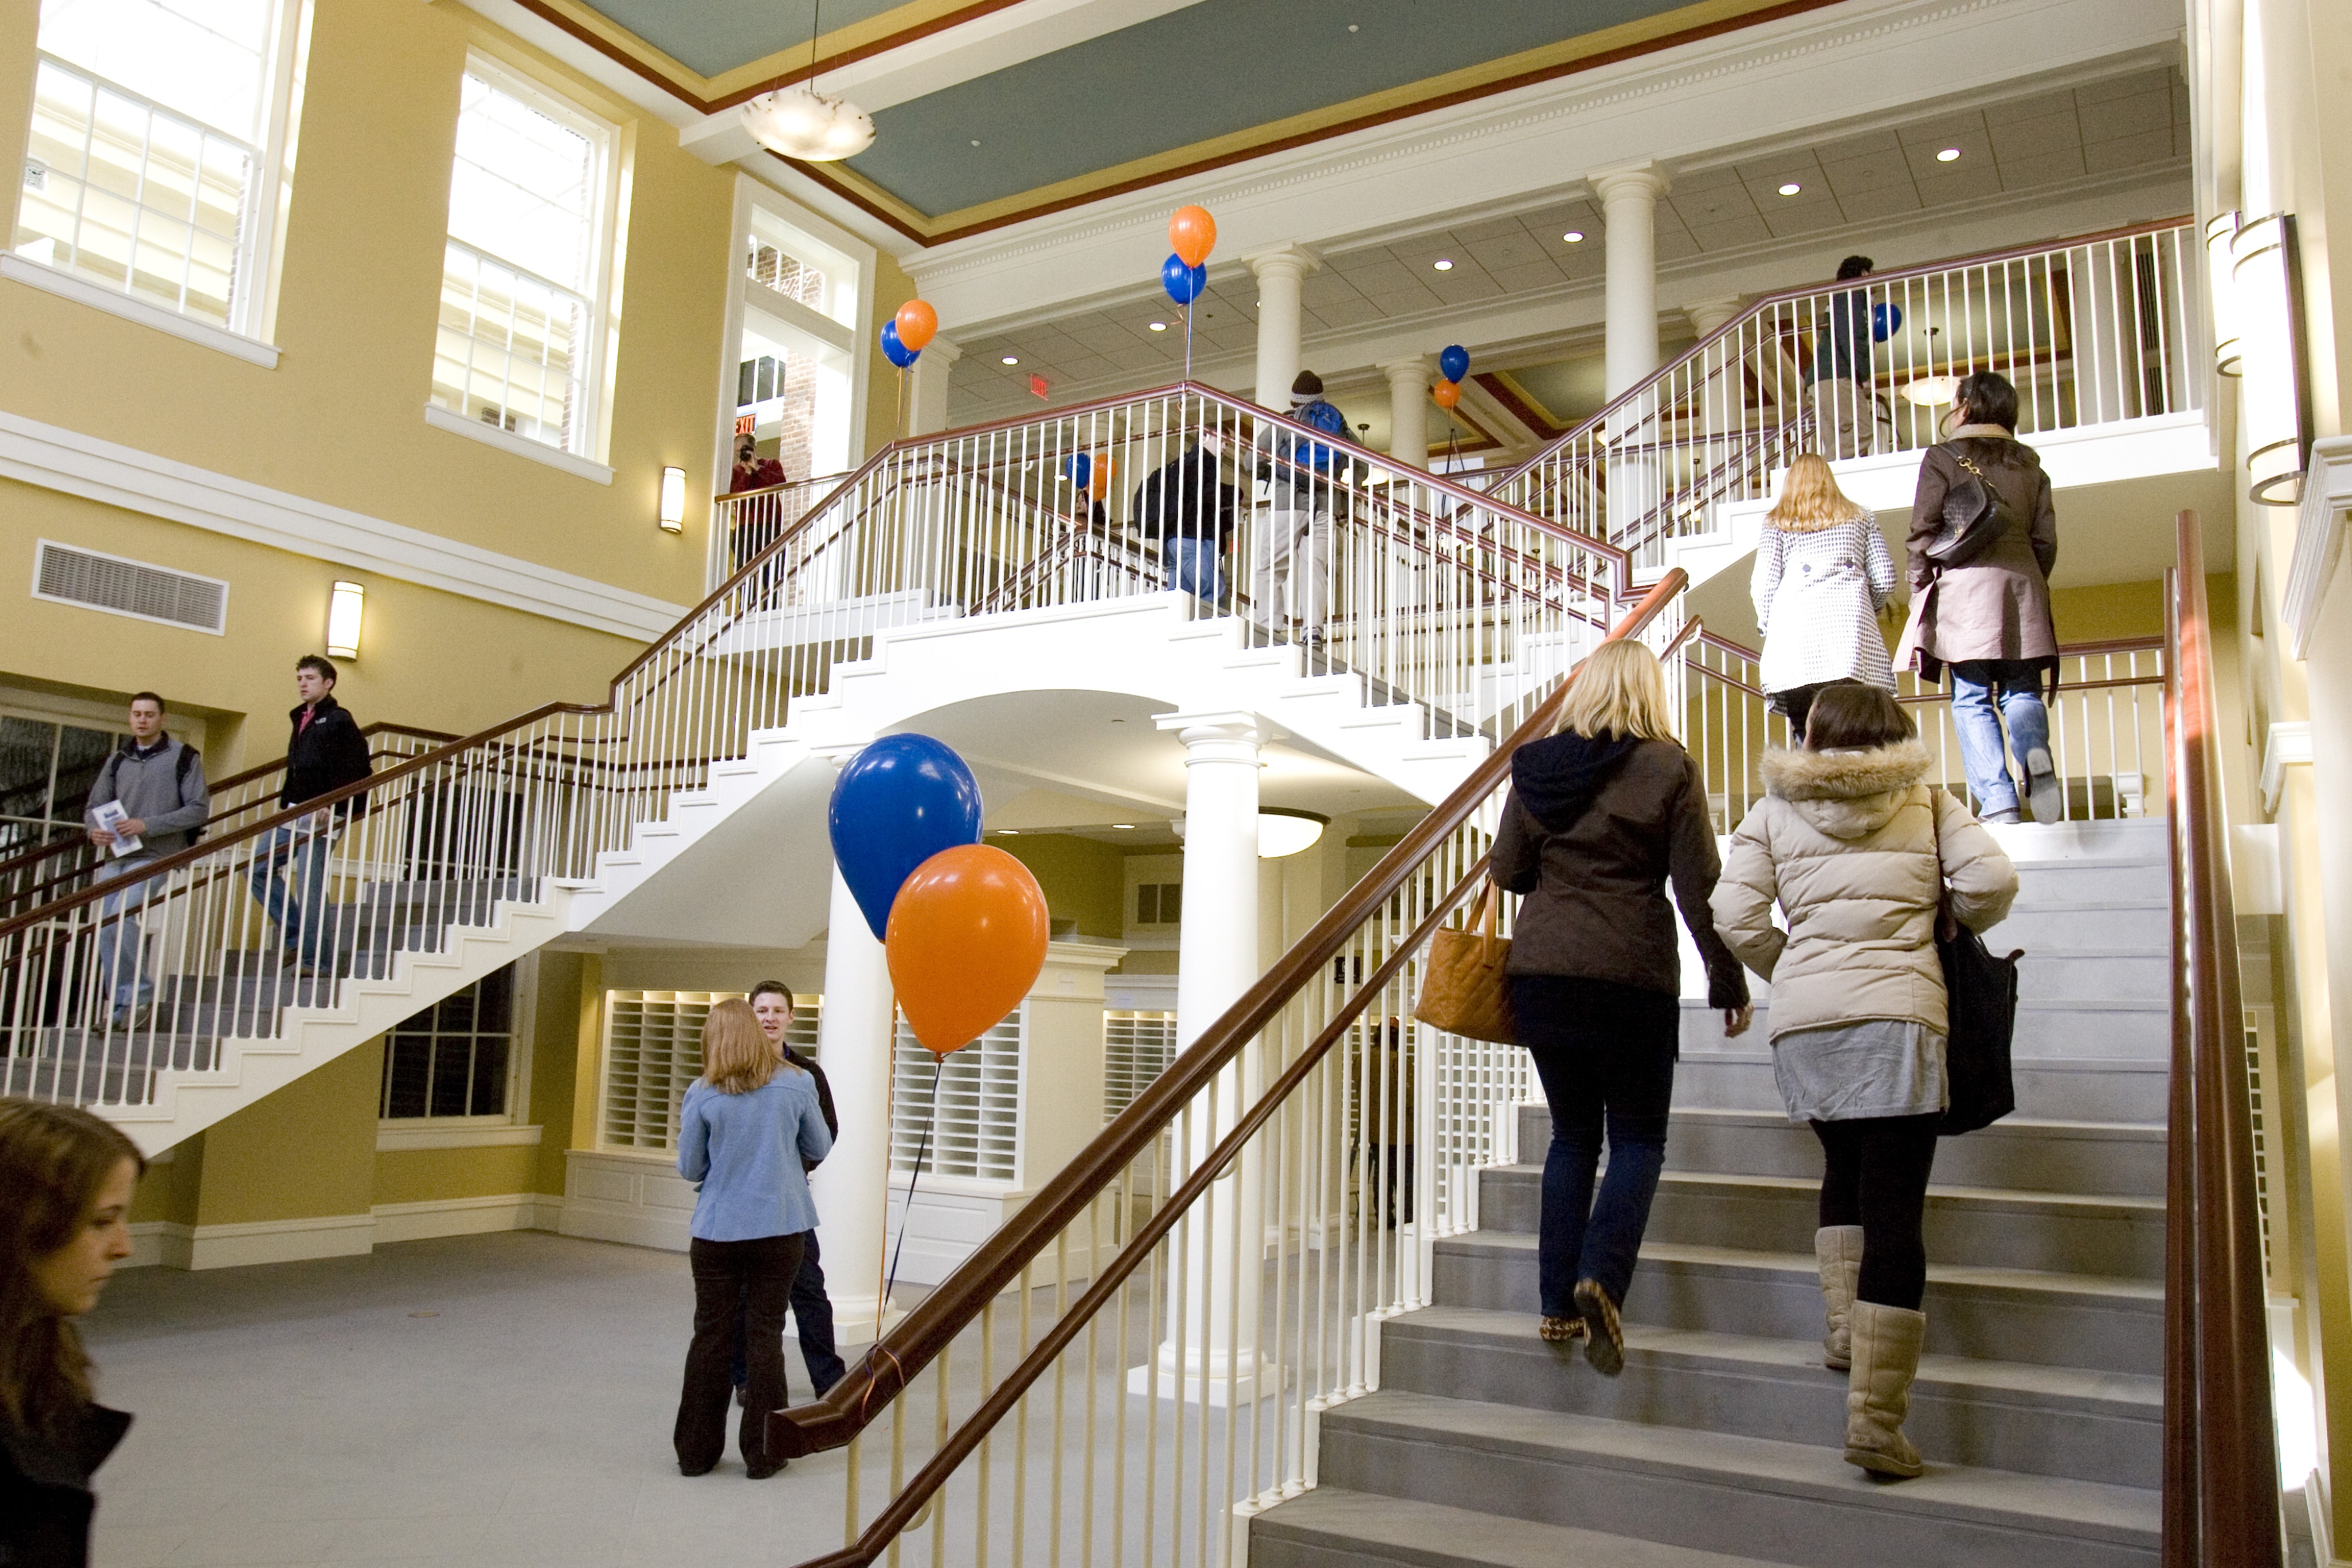 people walking up and down a stair case with orange and blue balloons tied on the railings